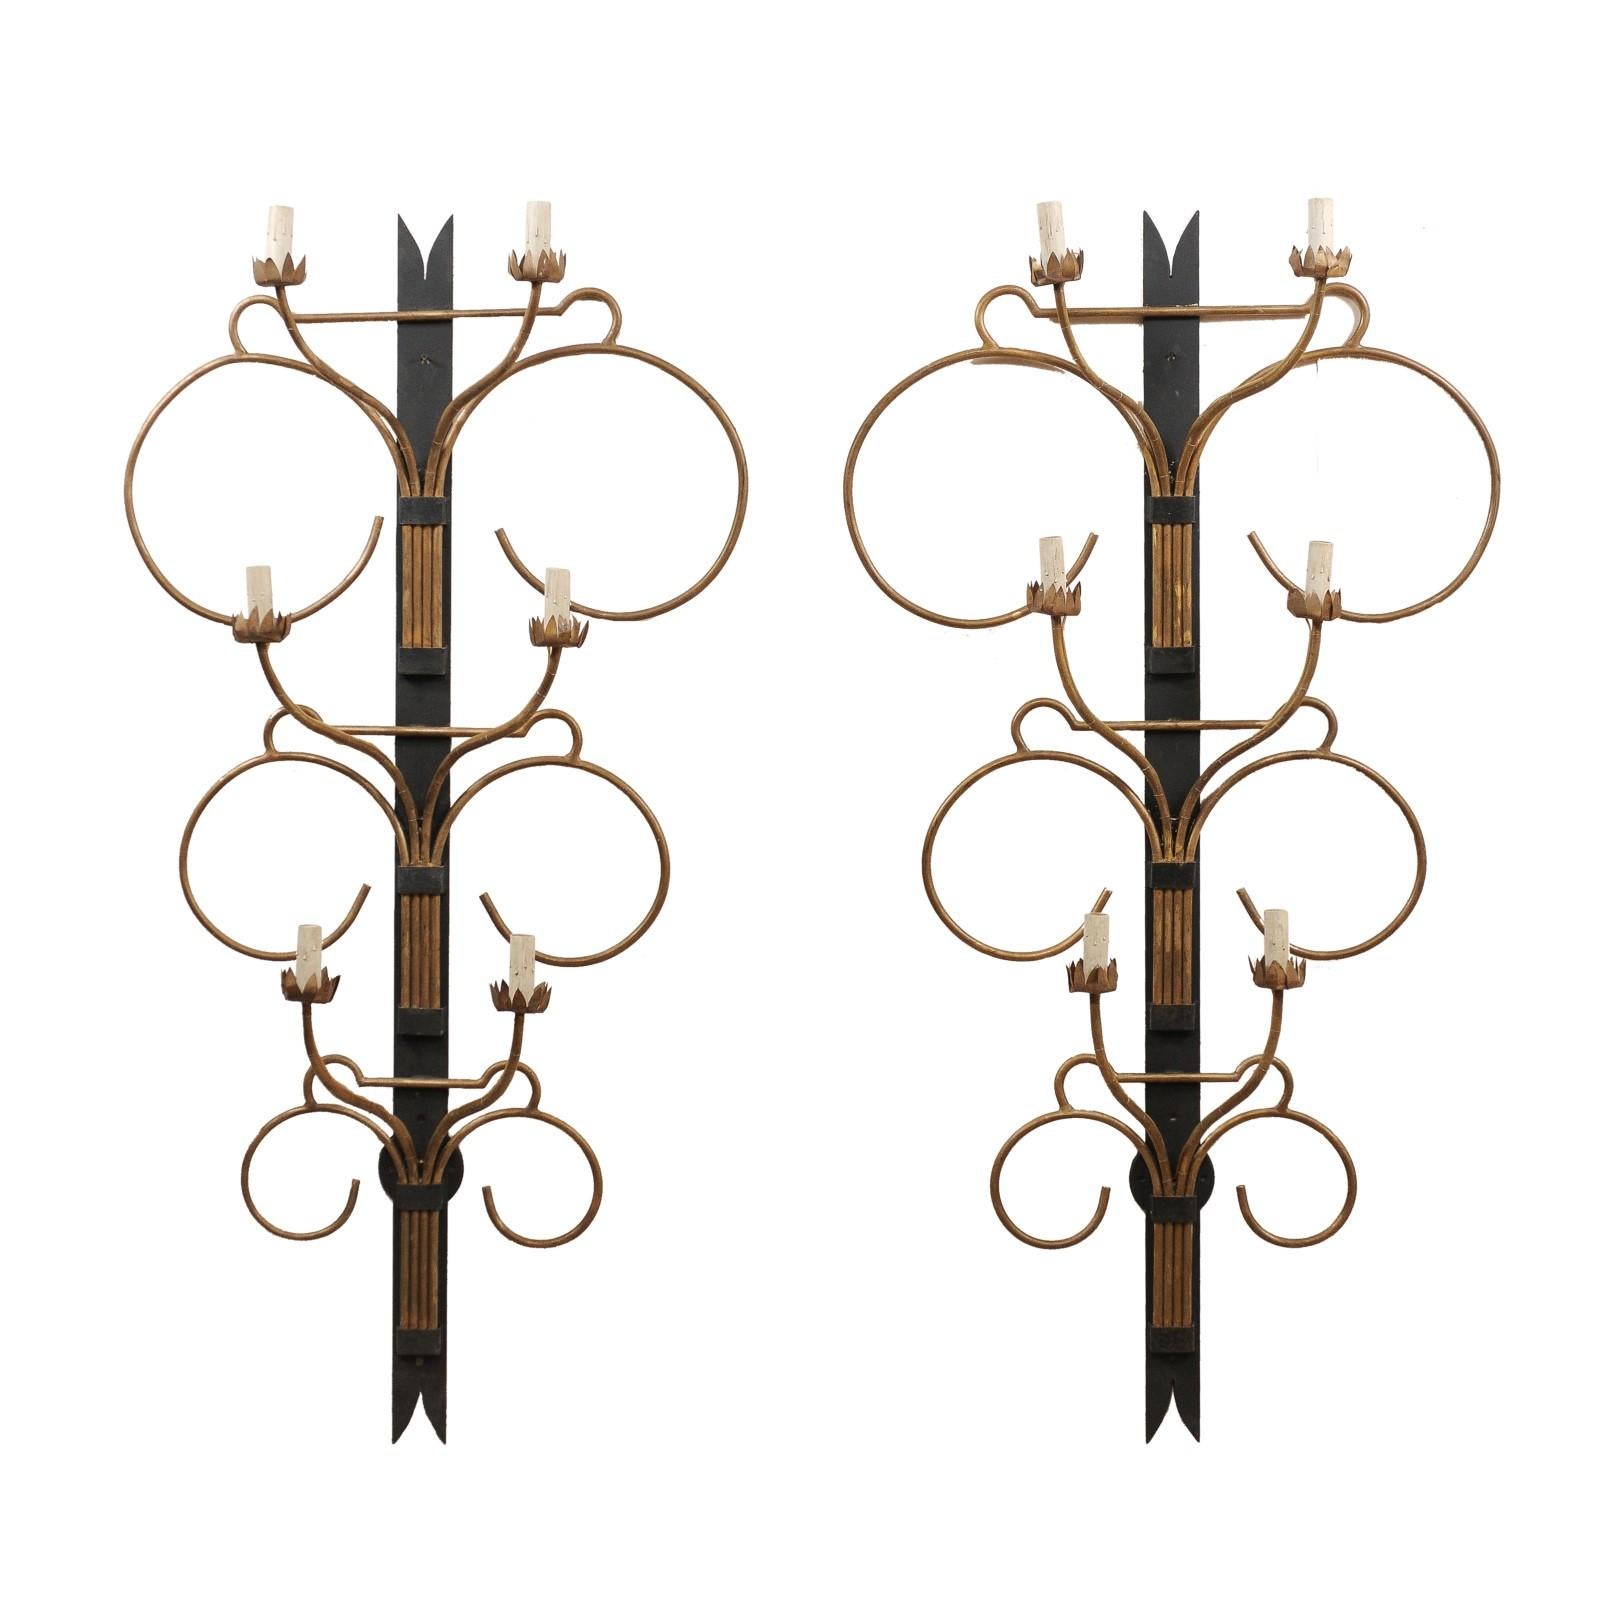 Fabulous Large Scale French Art Deco Sconces from the Mid-20th Century